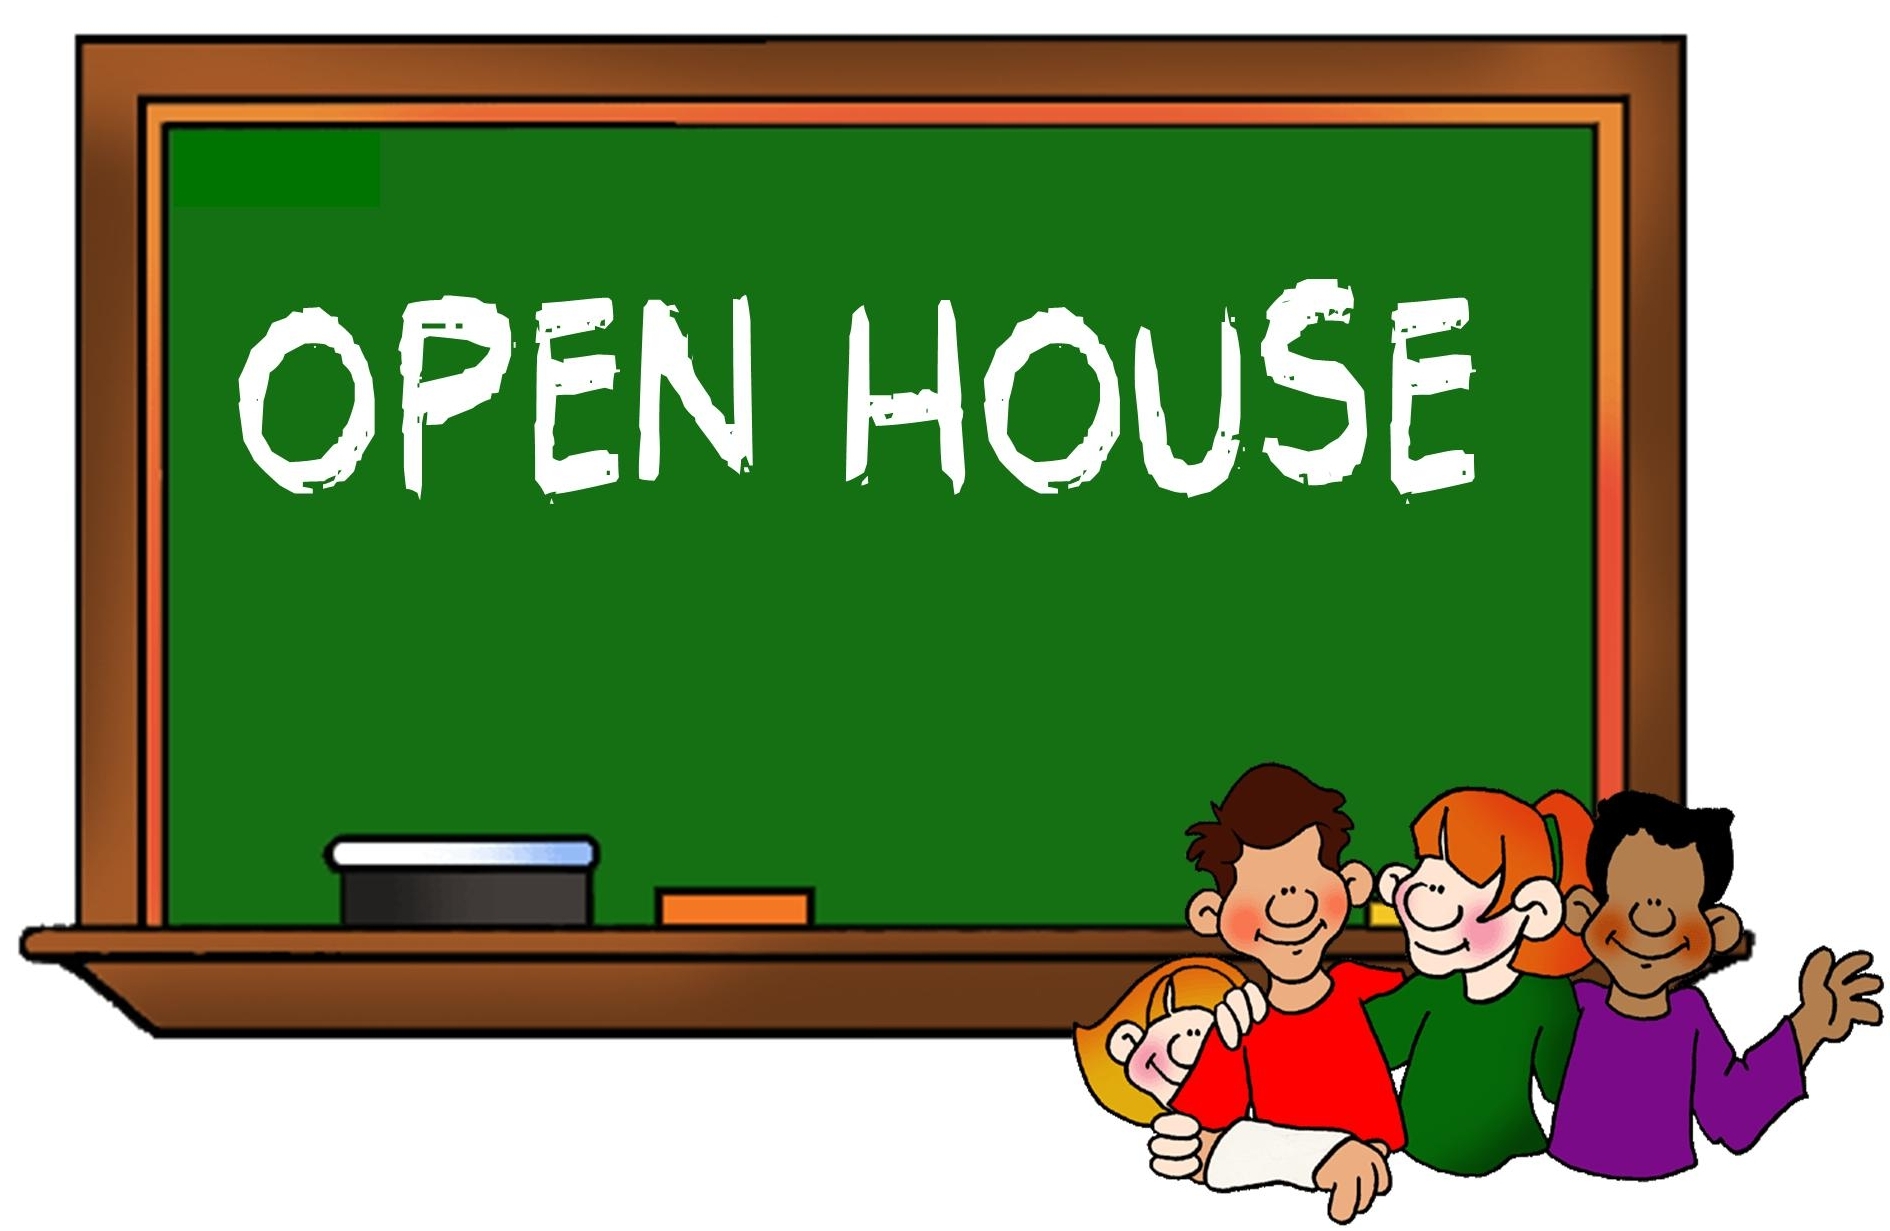 ... open house sign ...